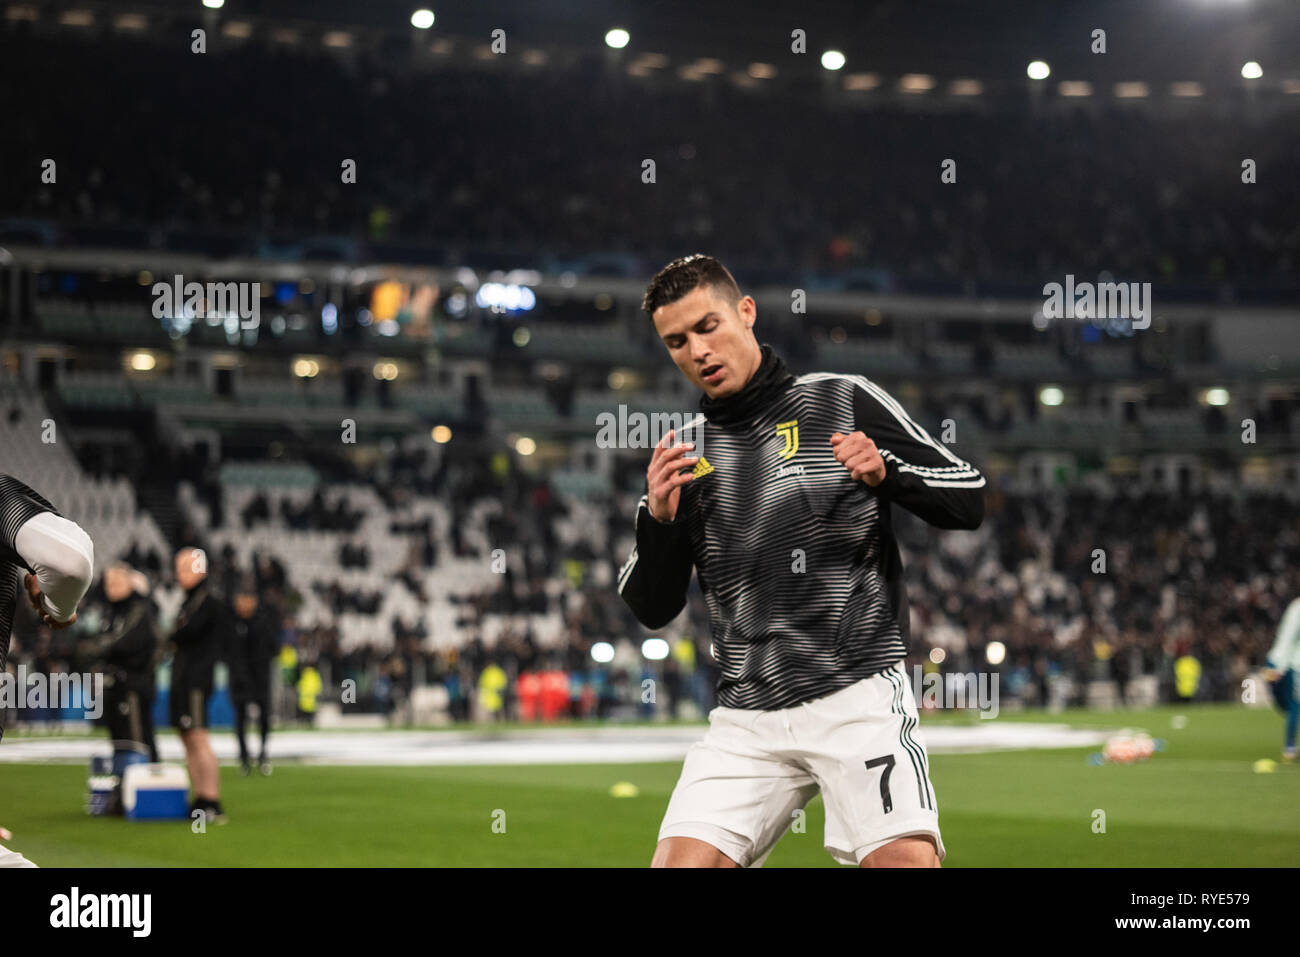 Cristiano Ronaldo Of Juventus During The Champions League